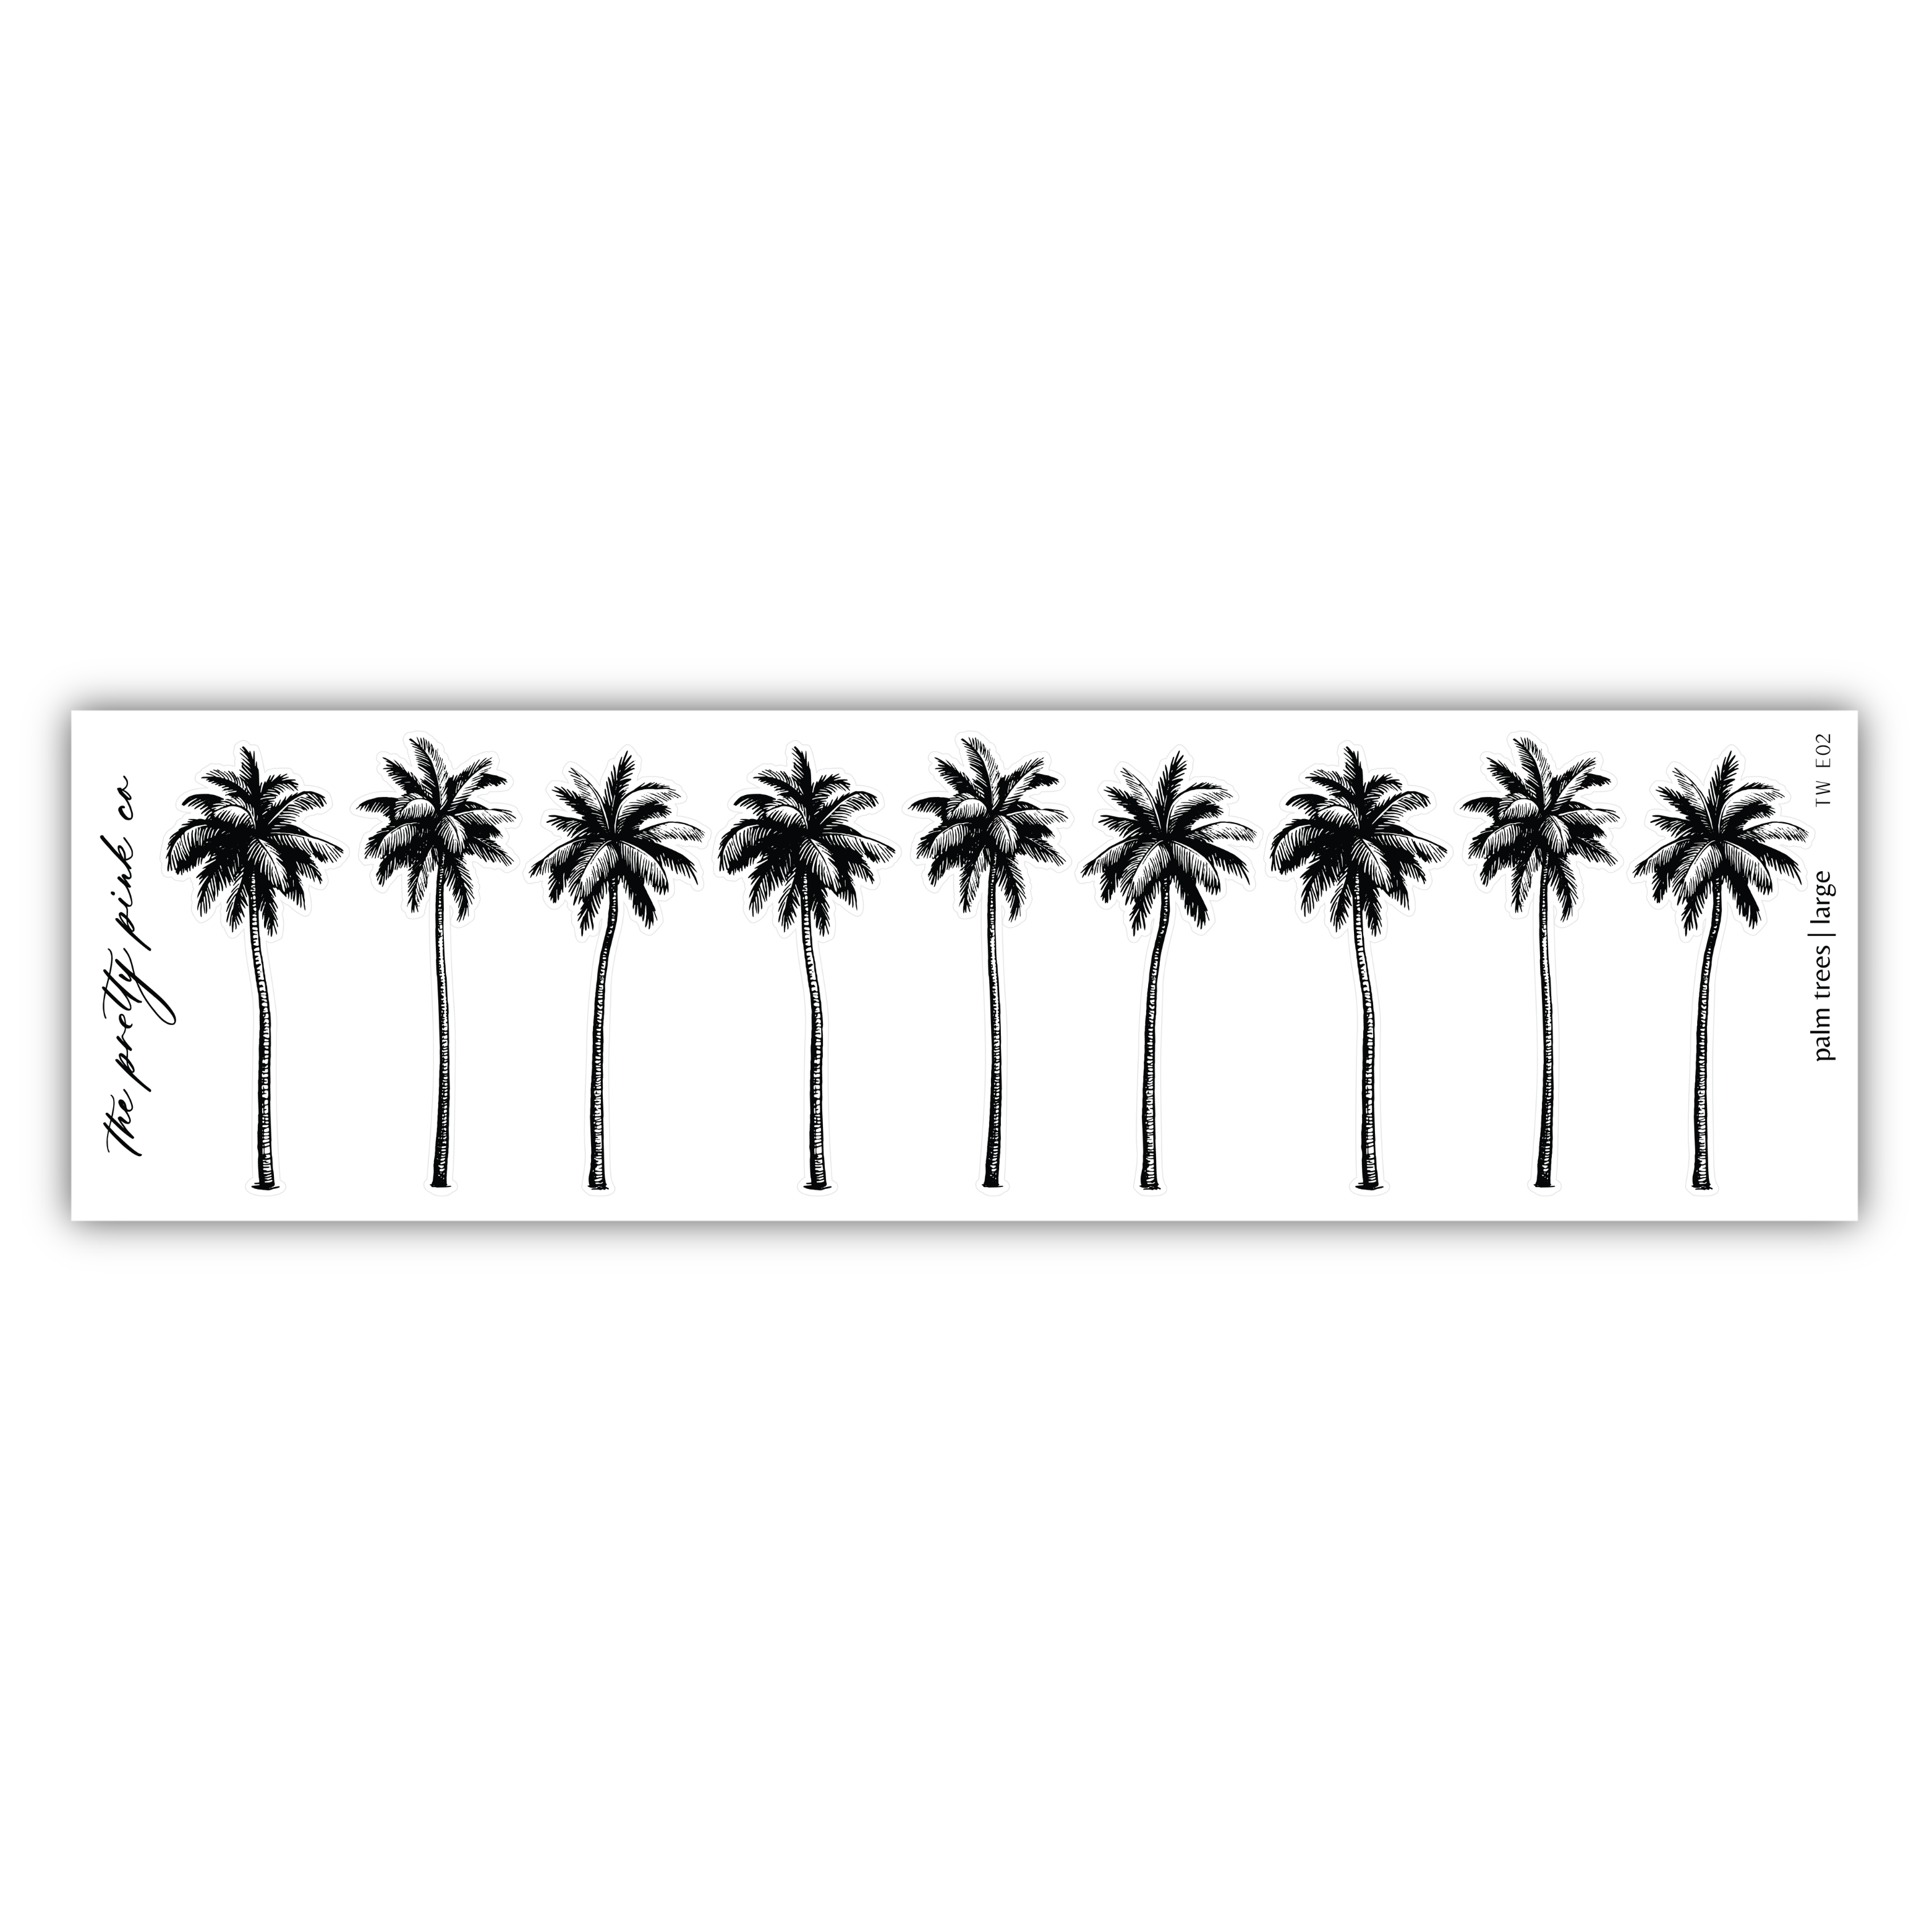 a black and white photo of a row of palm trees